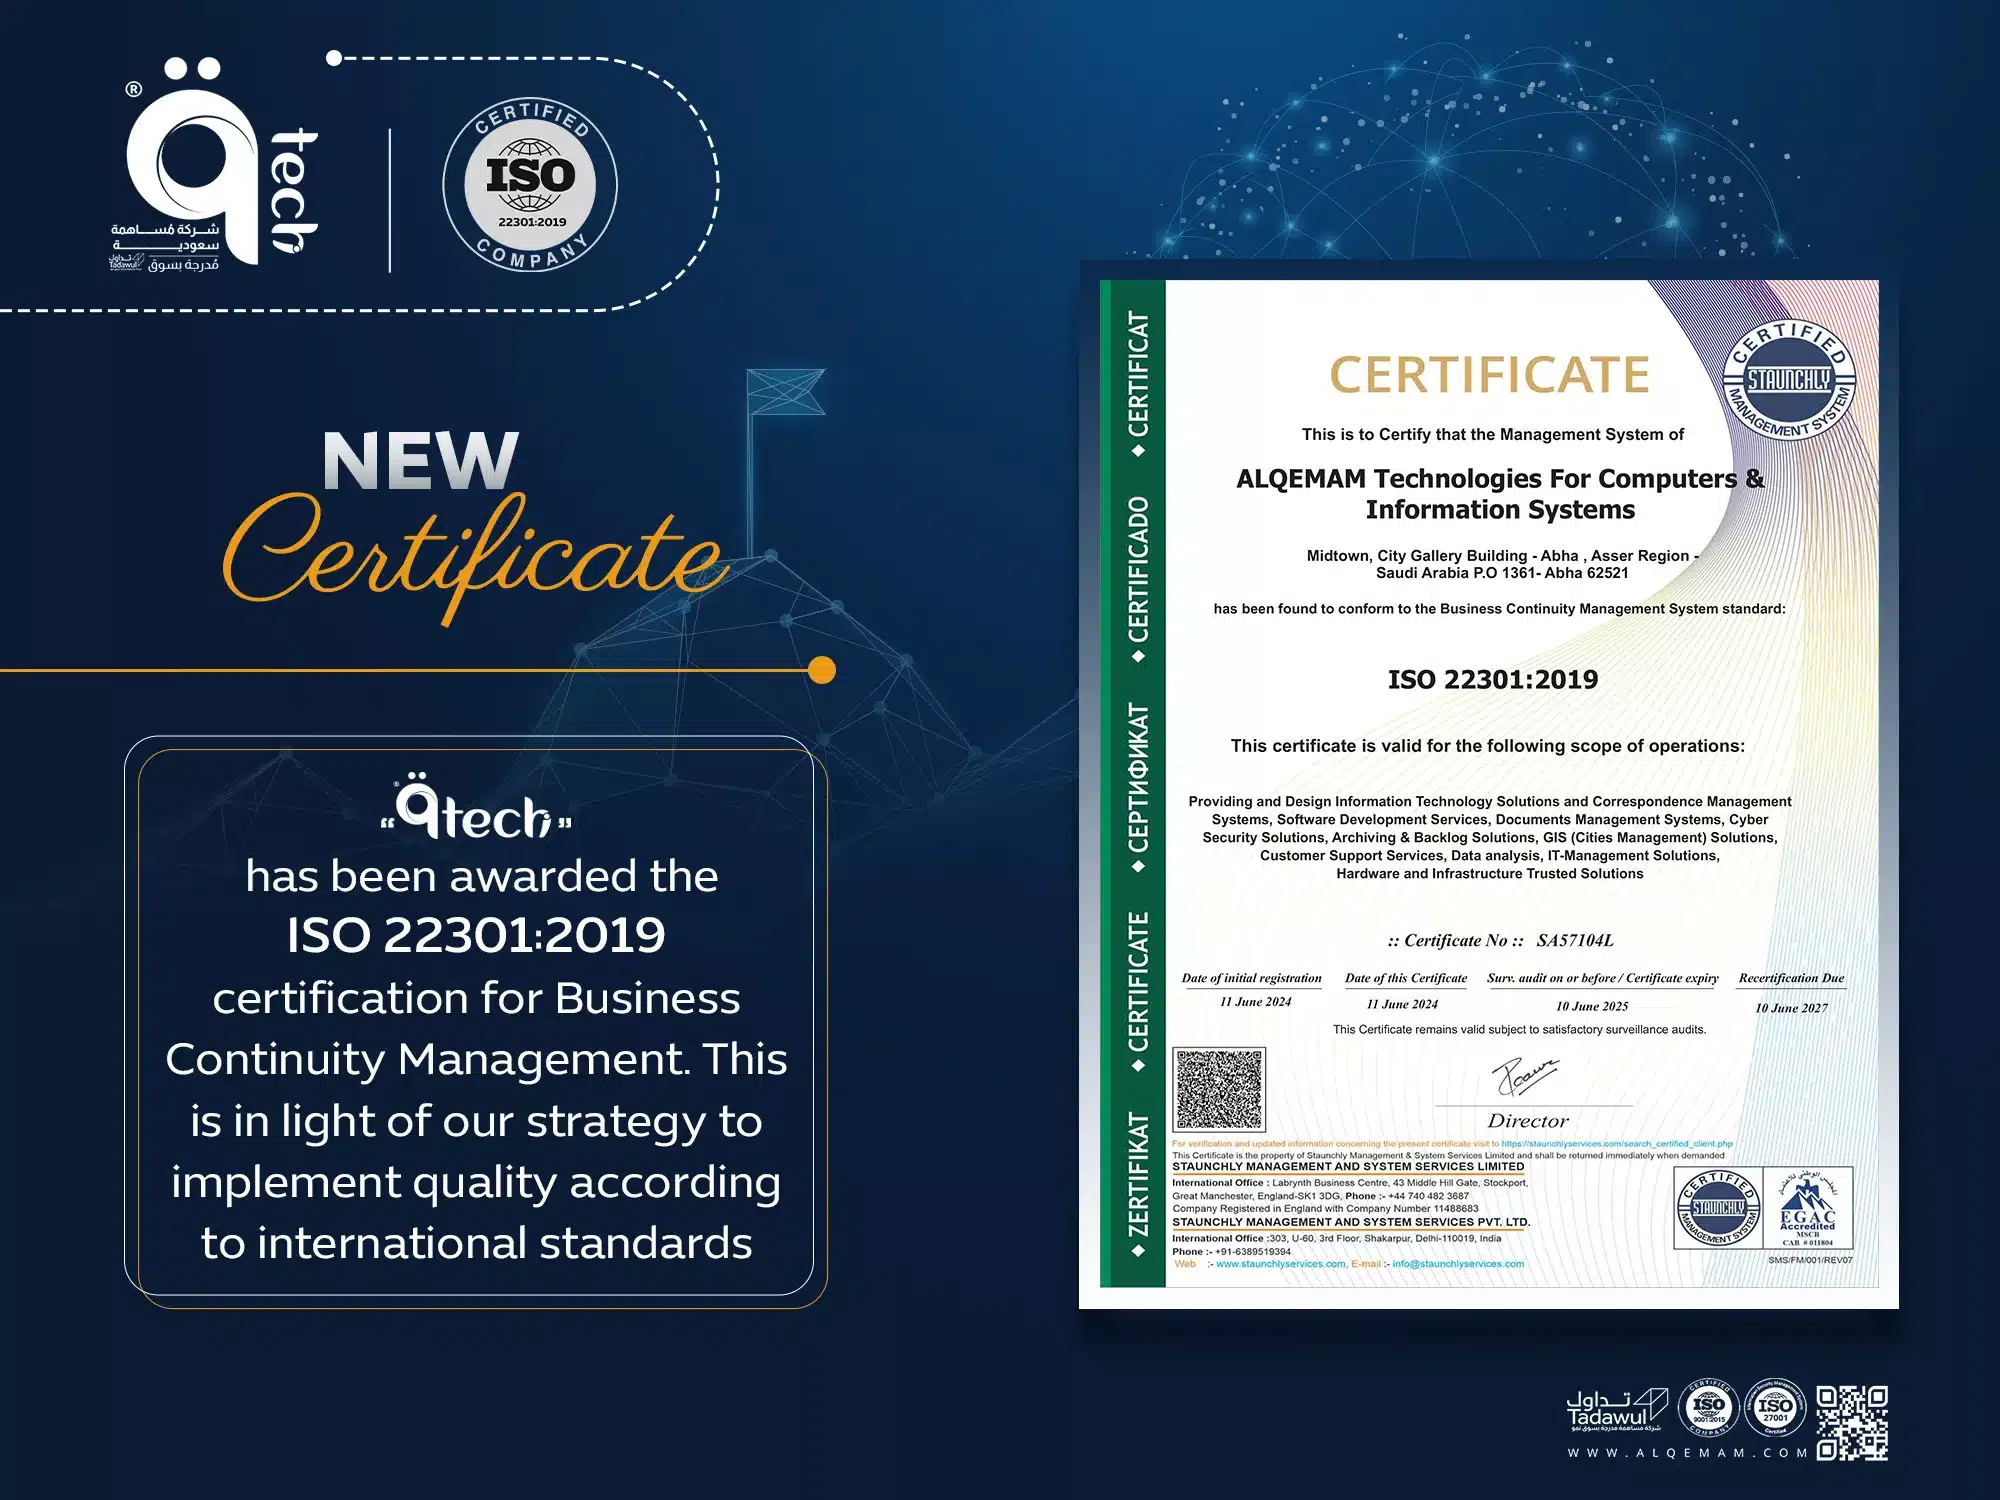 qTech. has been awarded the ISO 22301:2019